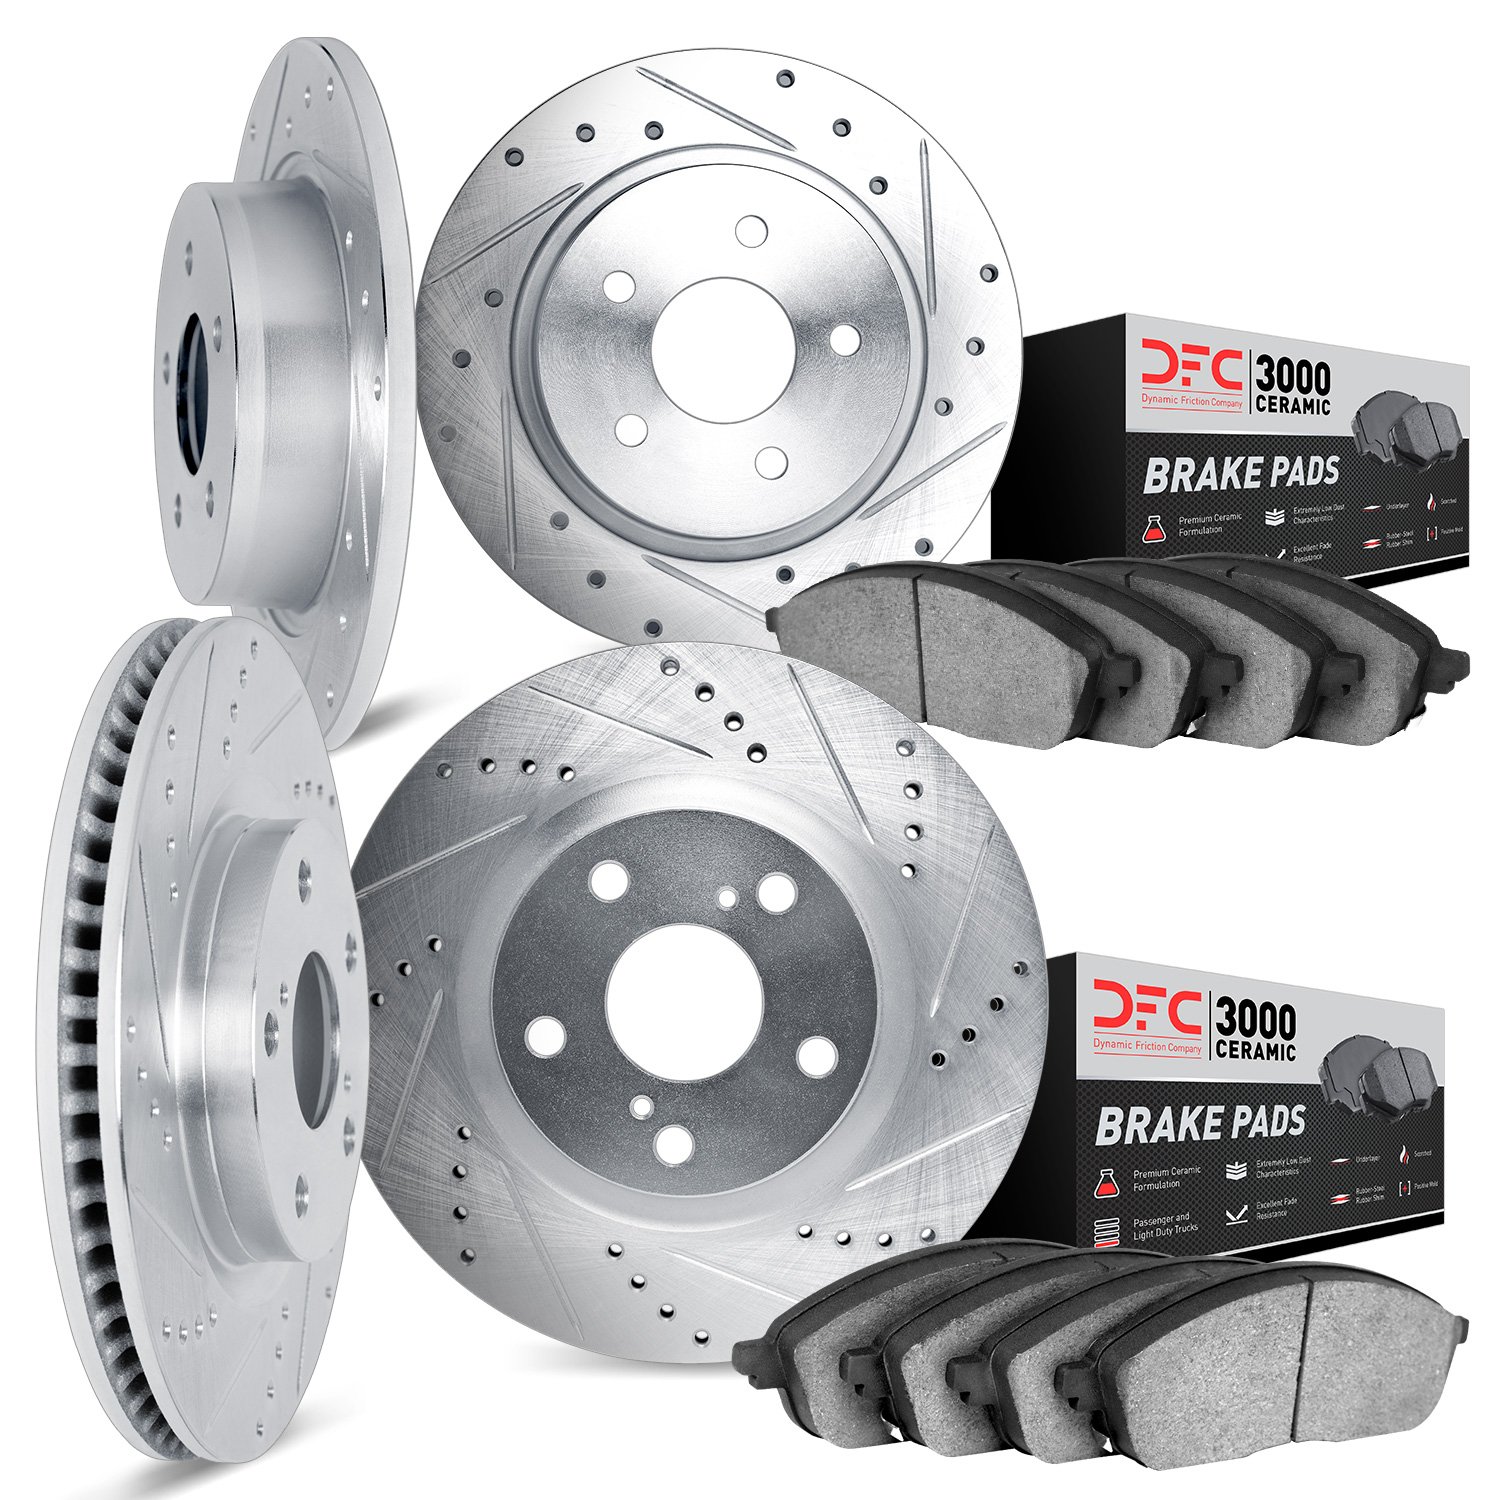 7304-56015 Drilled/Slotted Brake Rotor with 3000-Series Ceramic Brake Pads Kit [Silver], 1996-1997 Ford/Lincoln/Mercury/Mazda, P